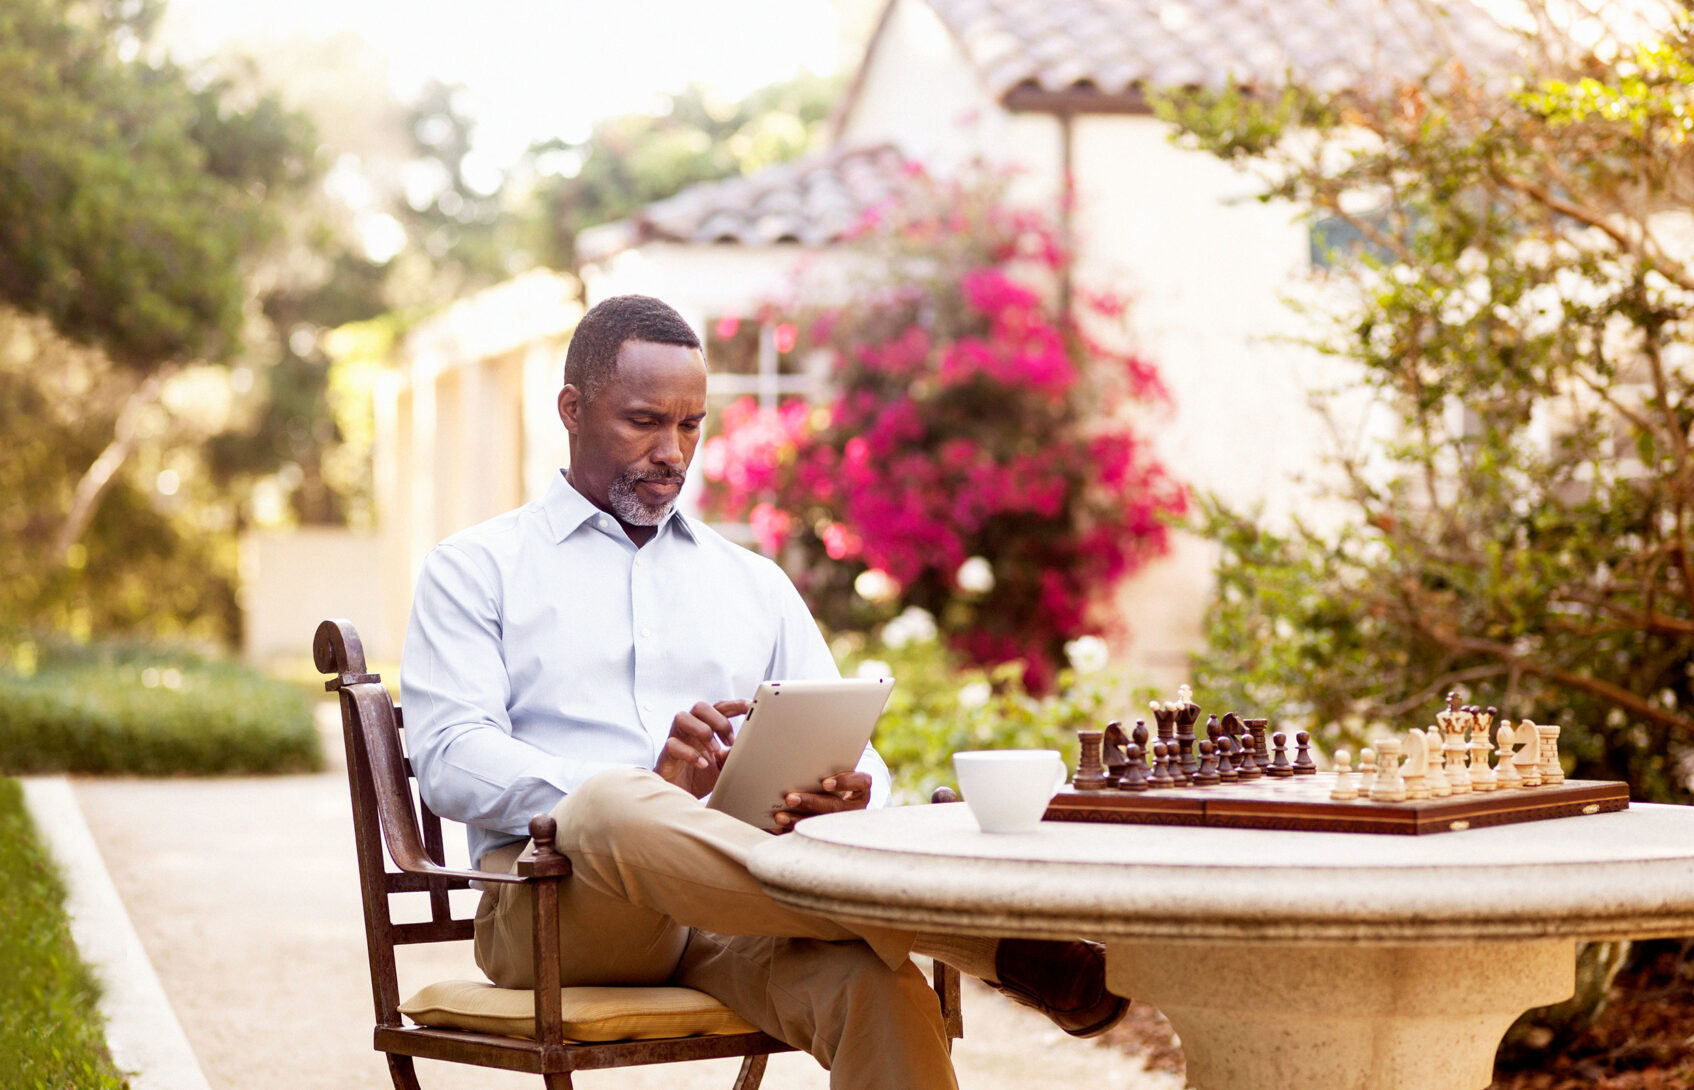 A man views a tablet while seated outside near a chess game.